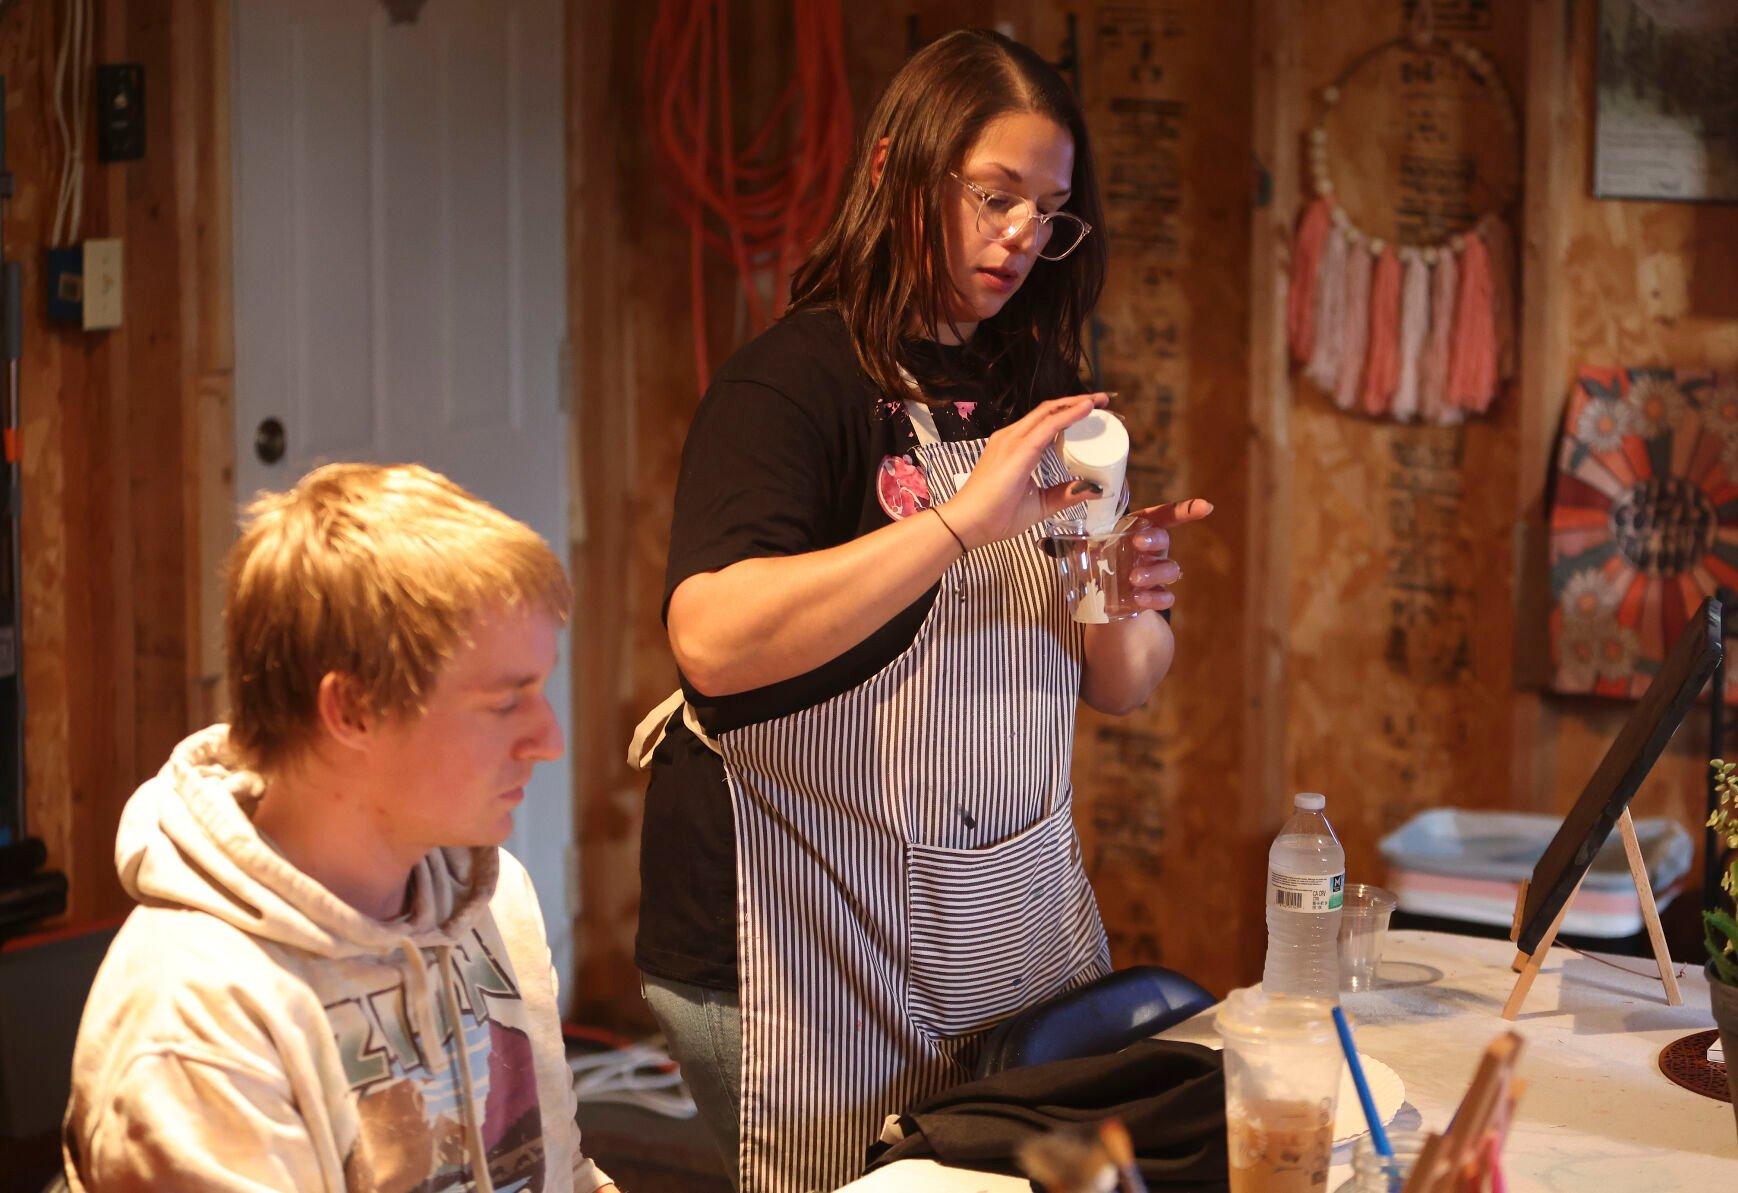 Owner of The Stoned Painter, Maria Cigrand, supplies paint to her students during a class held in East Dubuque, Ill.    PHOTO CREDIT: Dave Kettering
Telegraph Herald